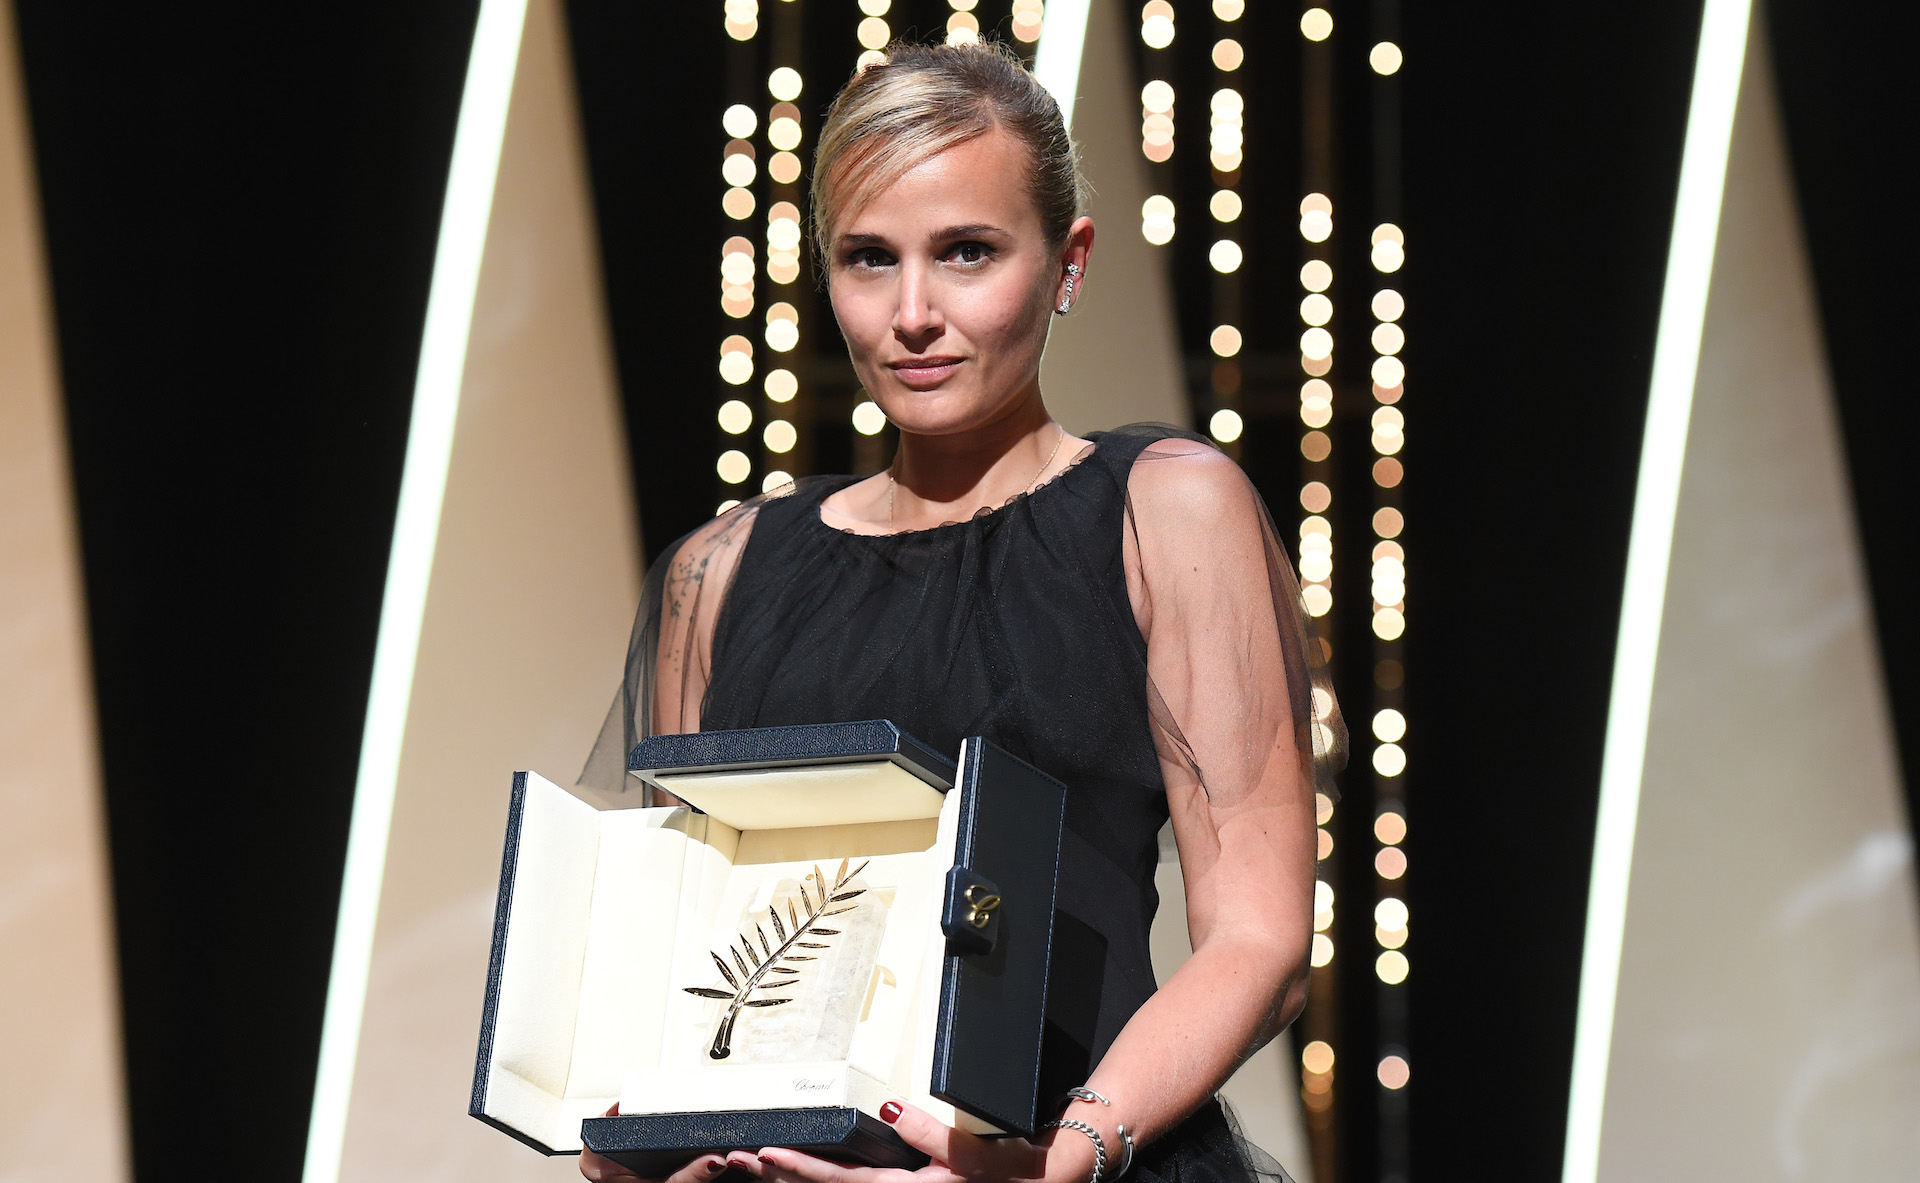 CANNES, FRANCE - JULY 17: Julia Ducournau poses with the Palme d'Or 'Best Movie Award' for 'Titane' during the closing ceremony of the 74th annual Cannes Film Festival on July 17, 2021 in Cannes, France. (Photo by Stephane Cardinale - Corbis/Corbis via Getty Images)